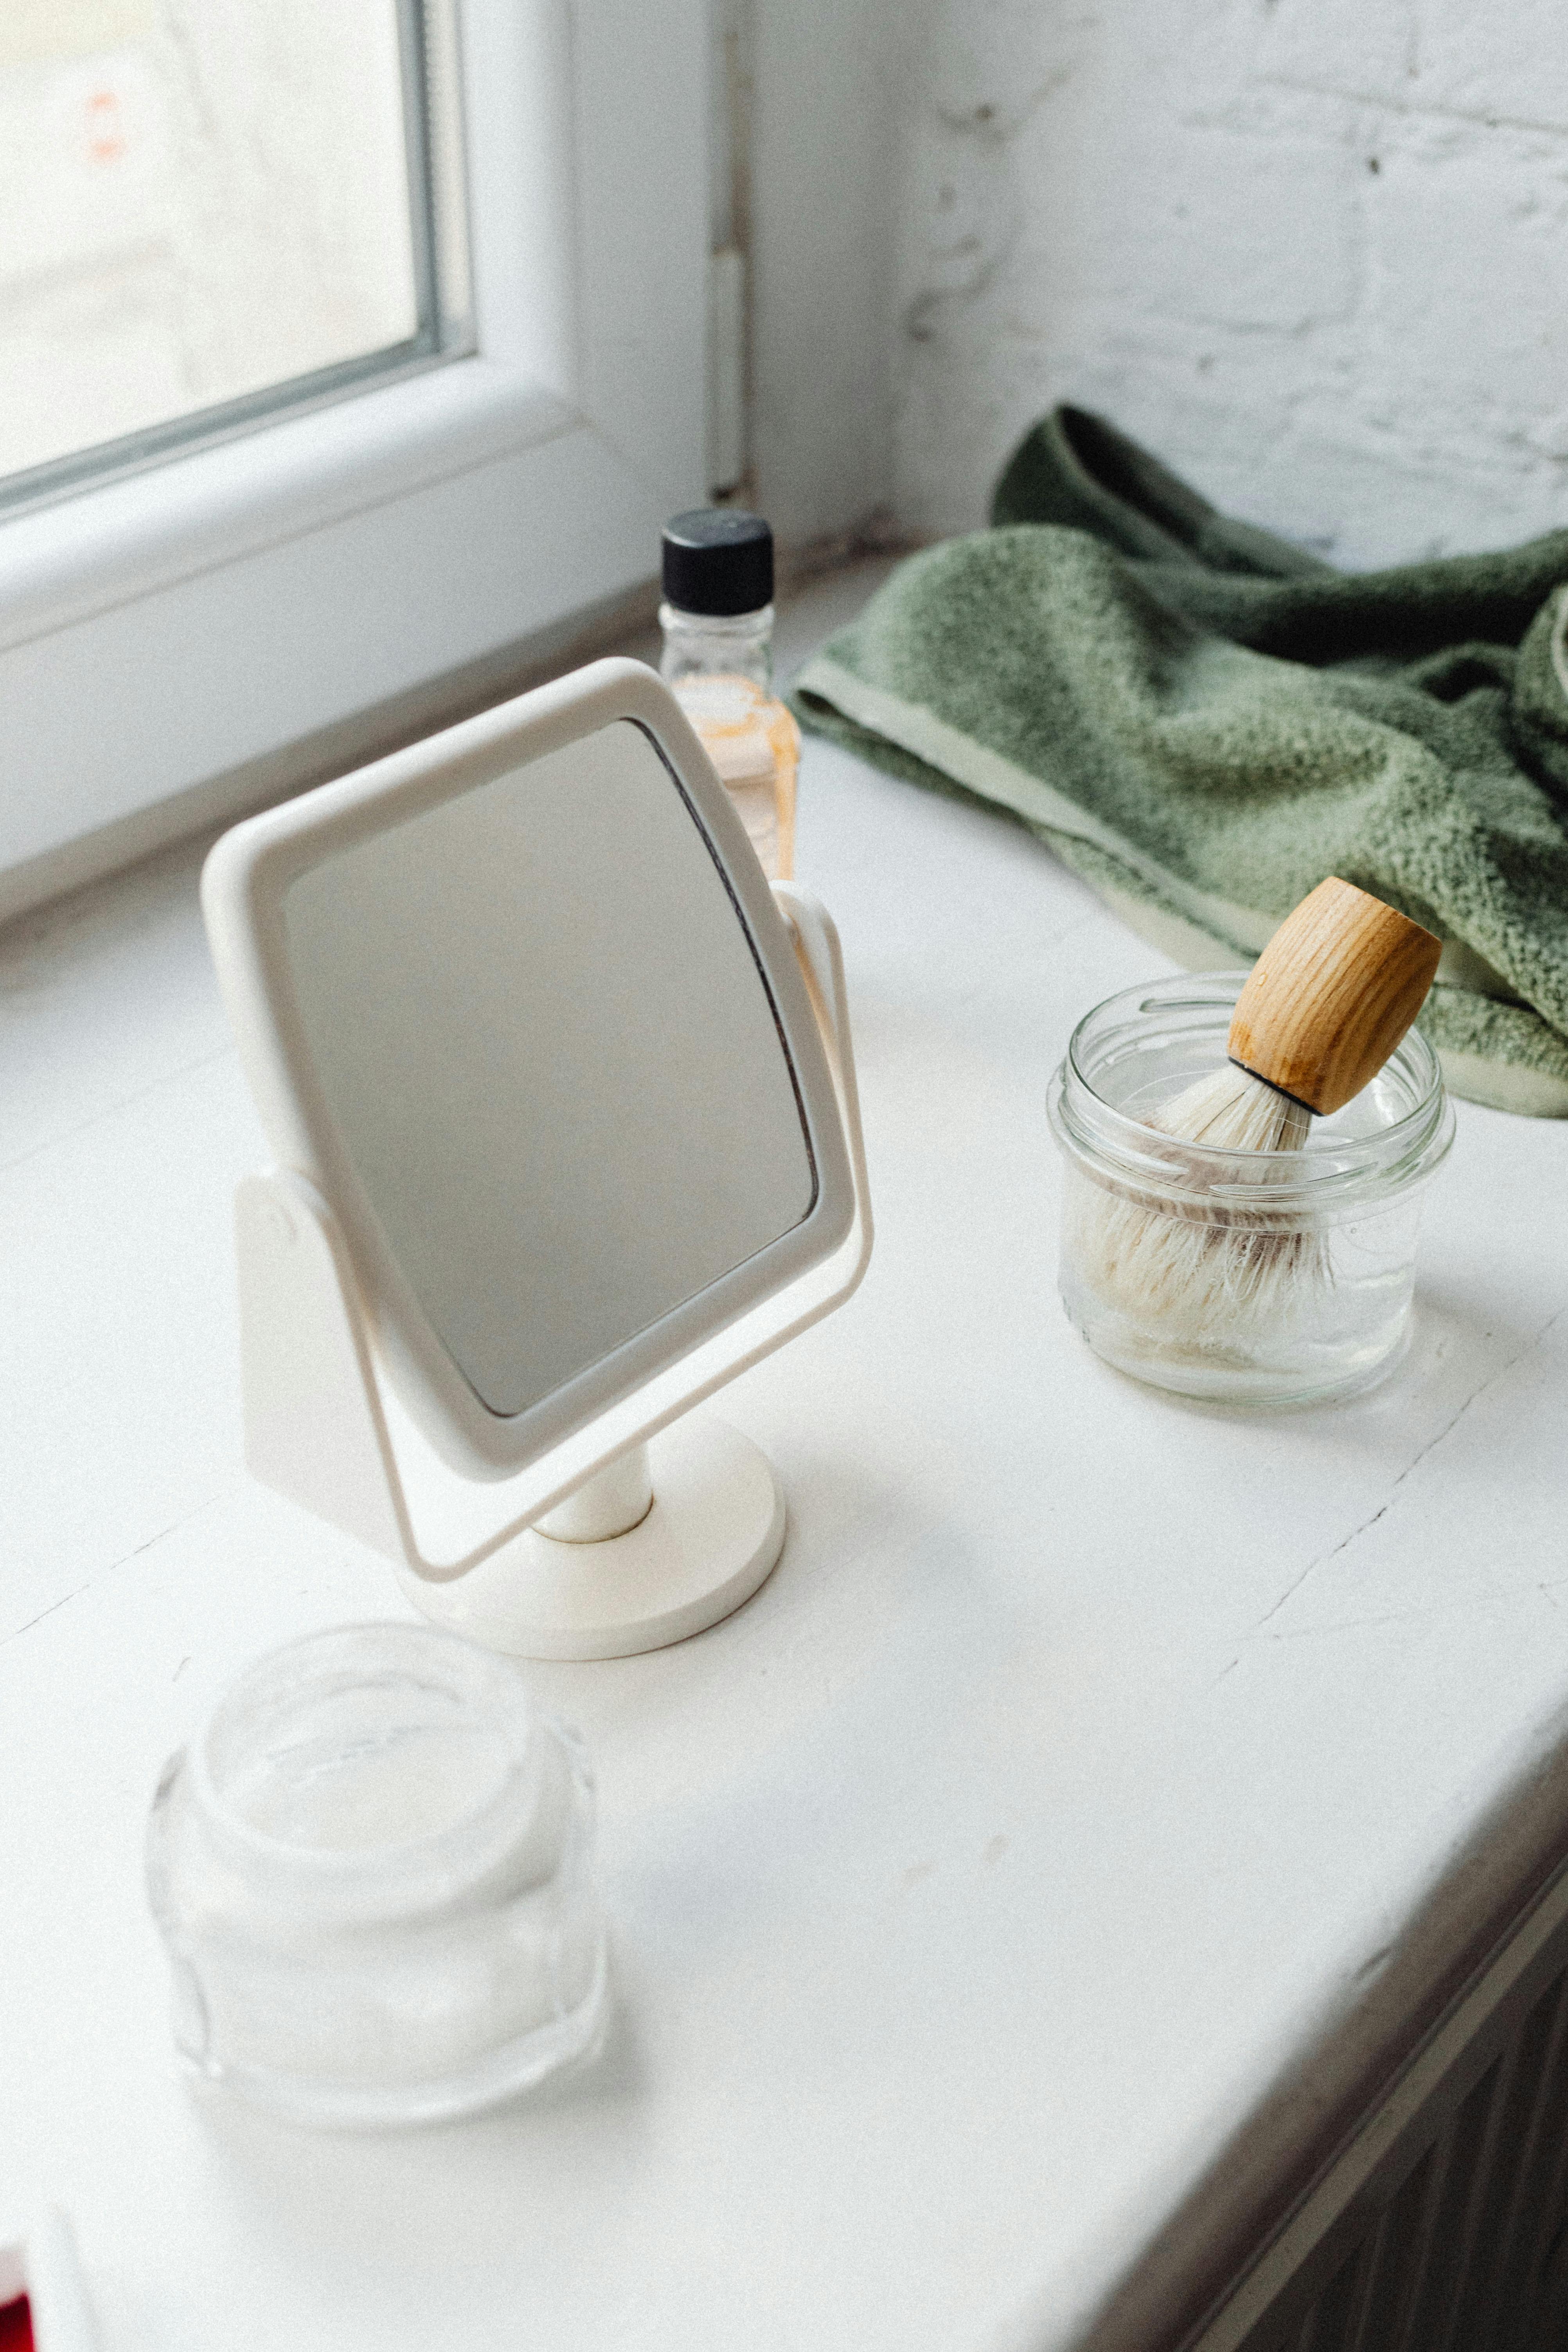 a mirror beside glass containers and shaving brush